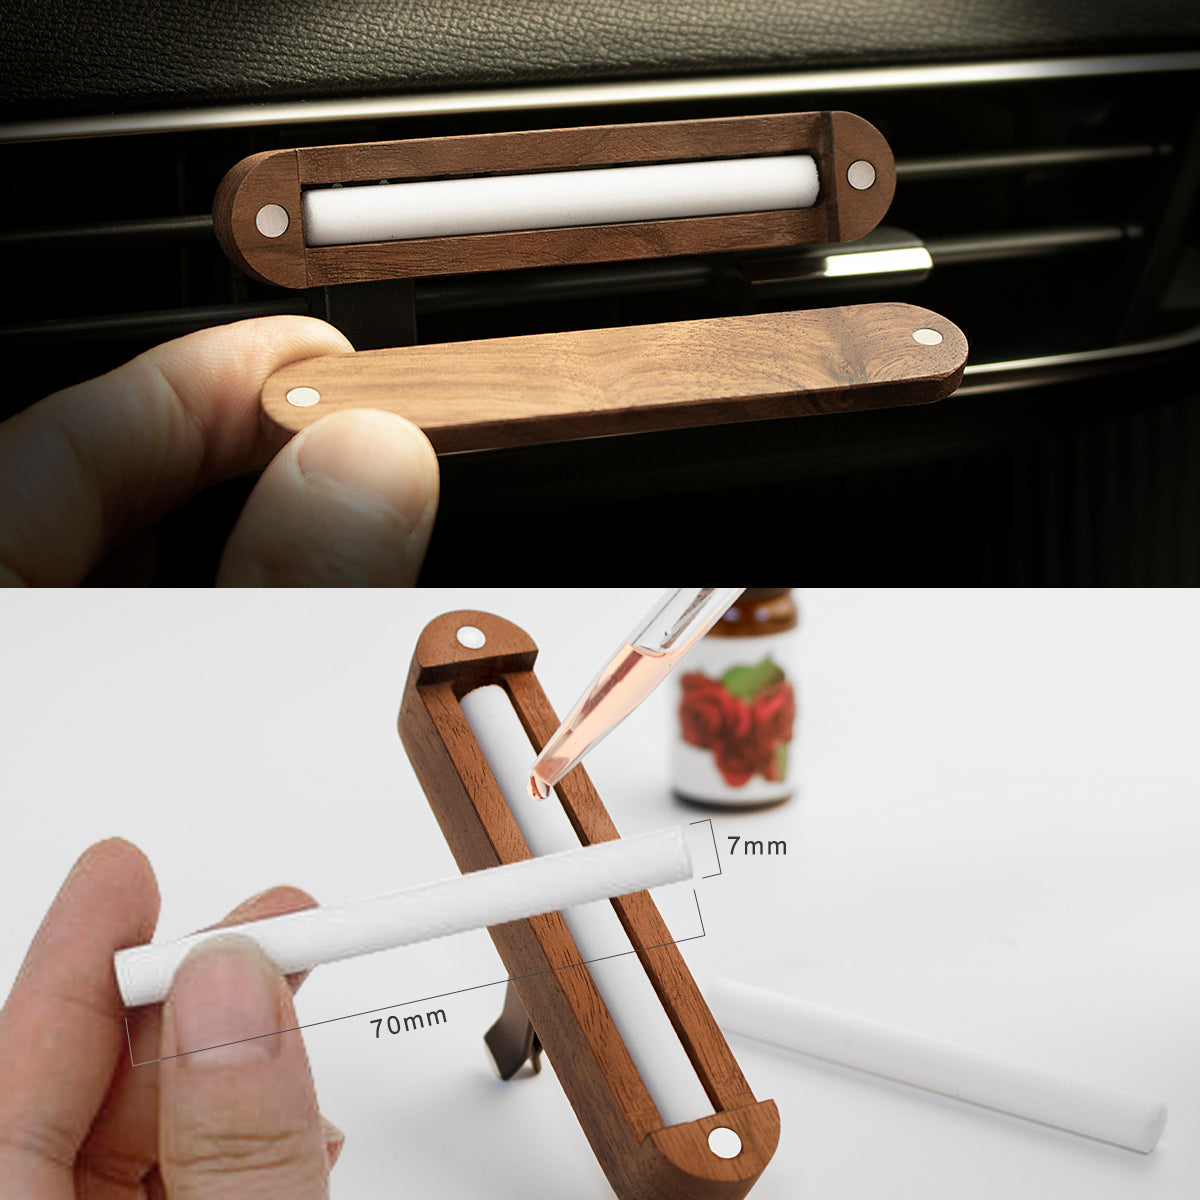 Car Air Fresheners Vent Clip 2PCS｜You can add your favorite